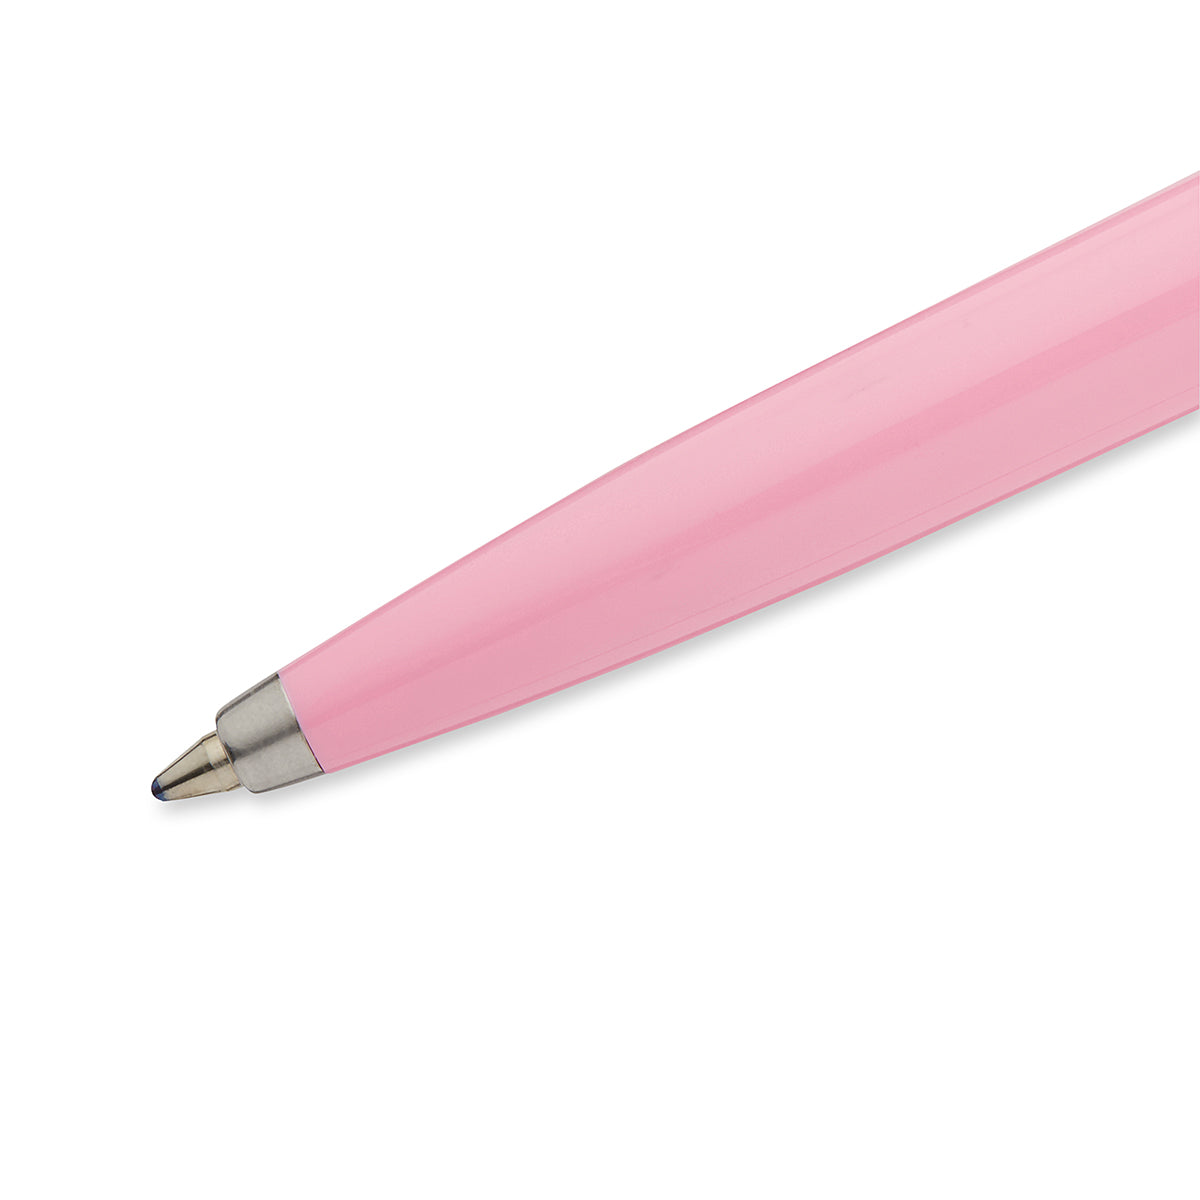 Parker Jotter Pink Ballpoint Pen With Black Gel Ink Made in France In Gift Box  Parker Ballpoint Pen